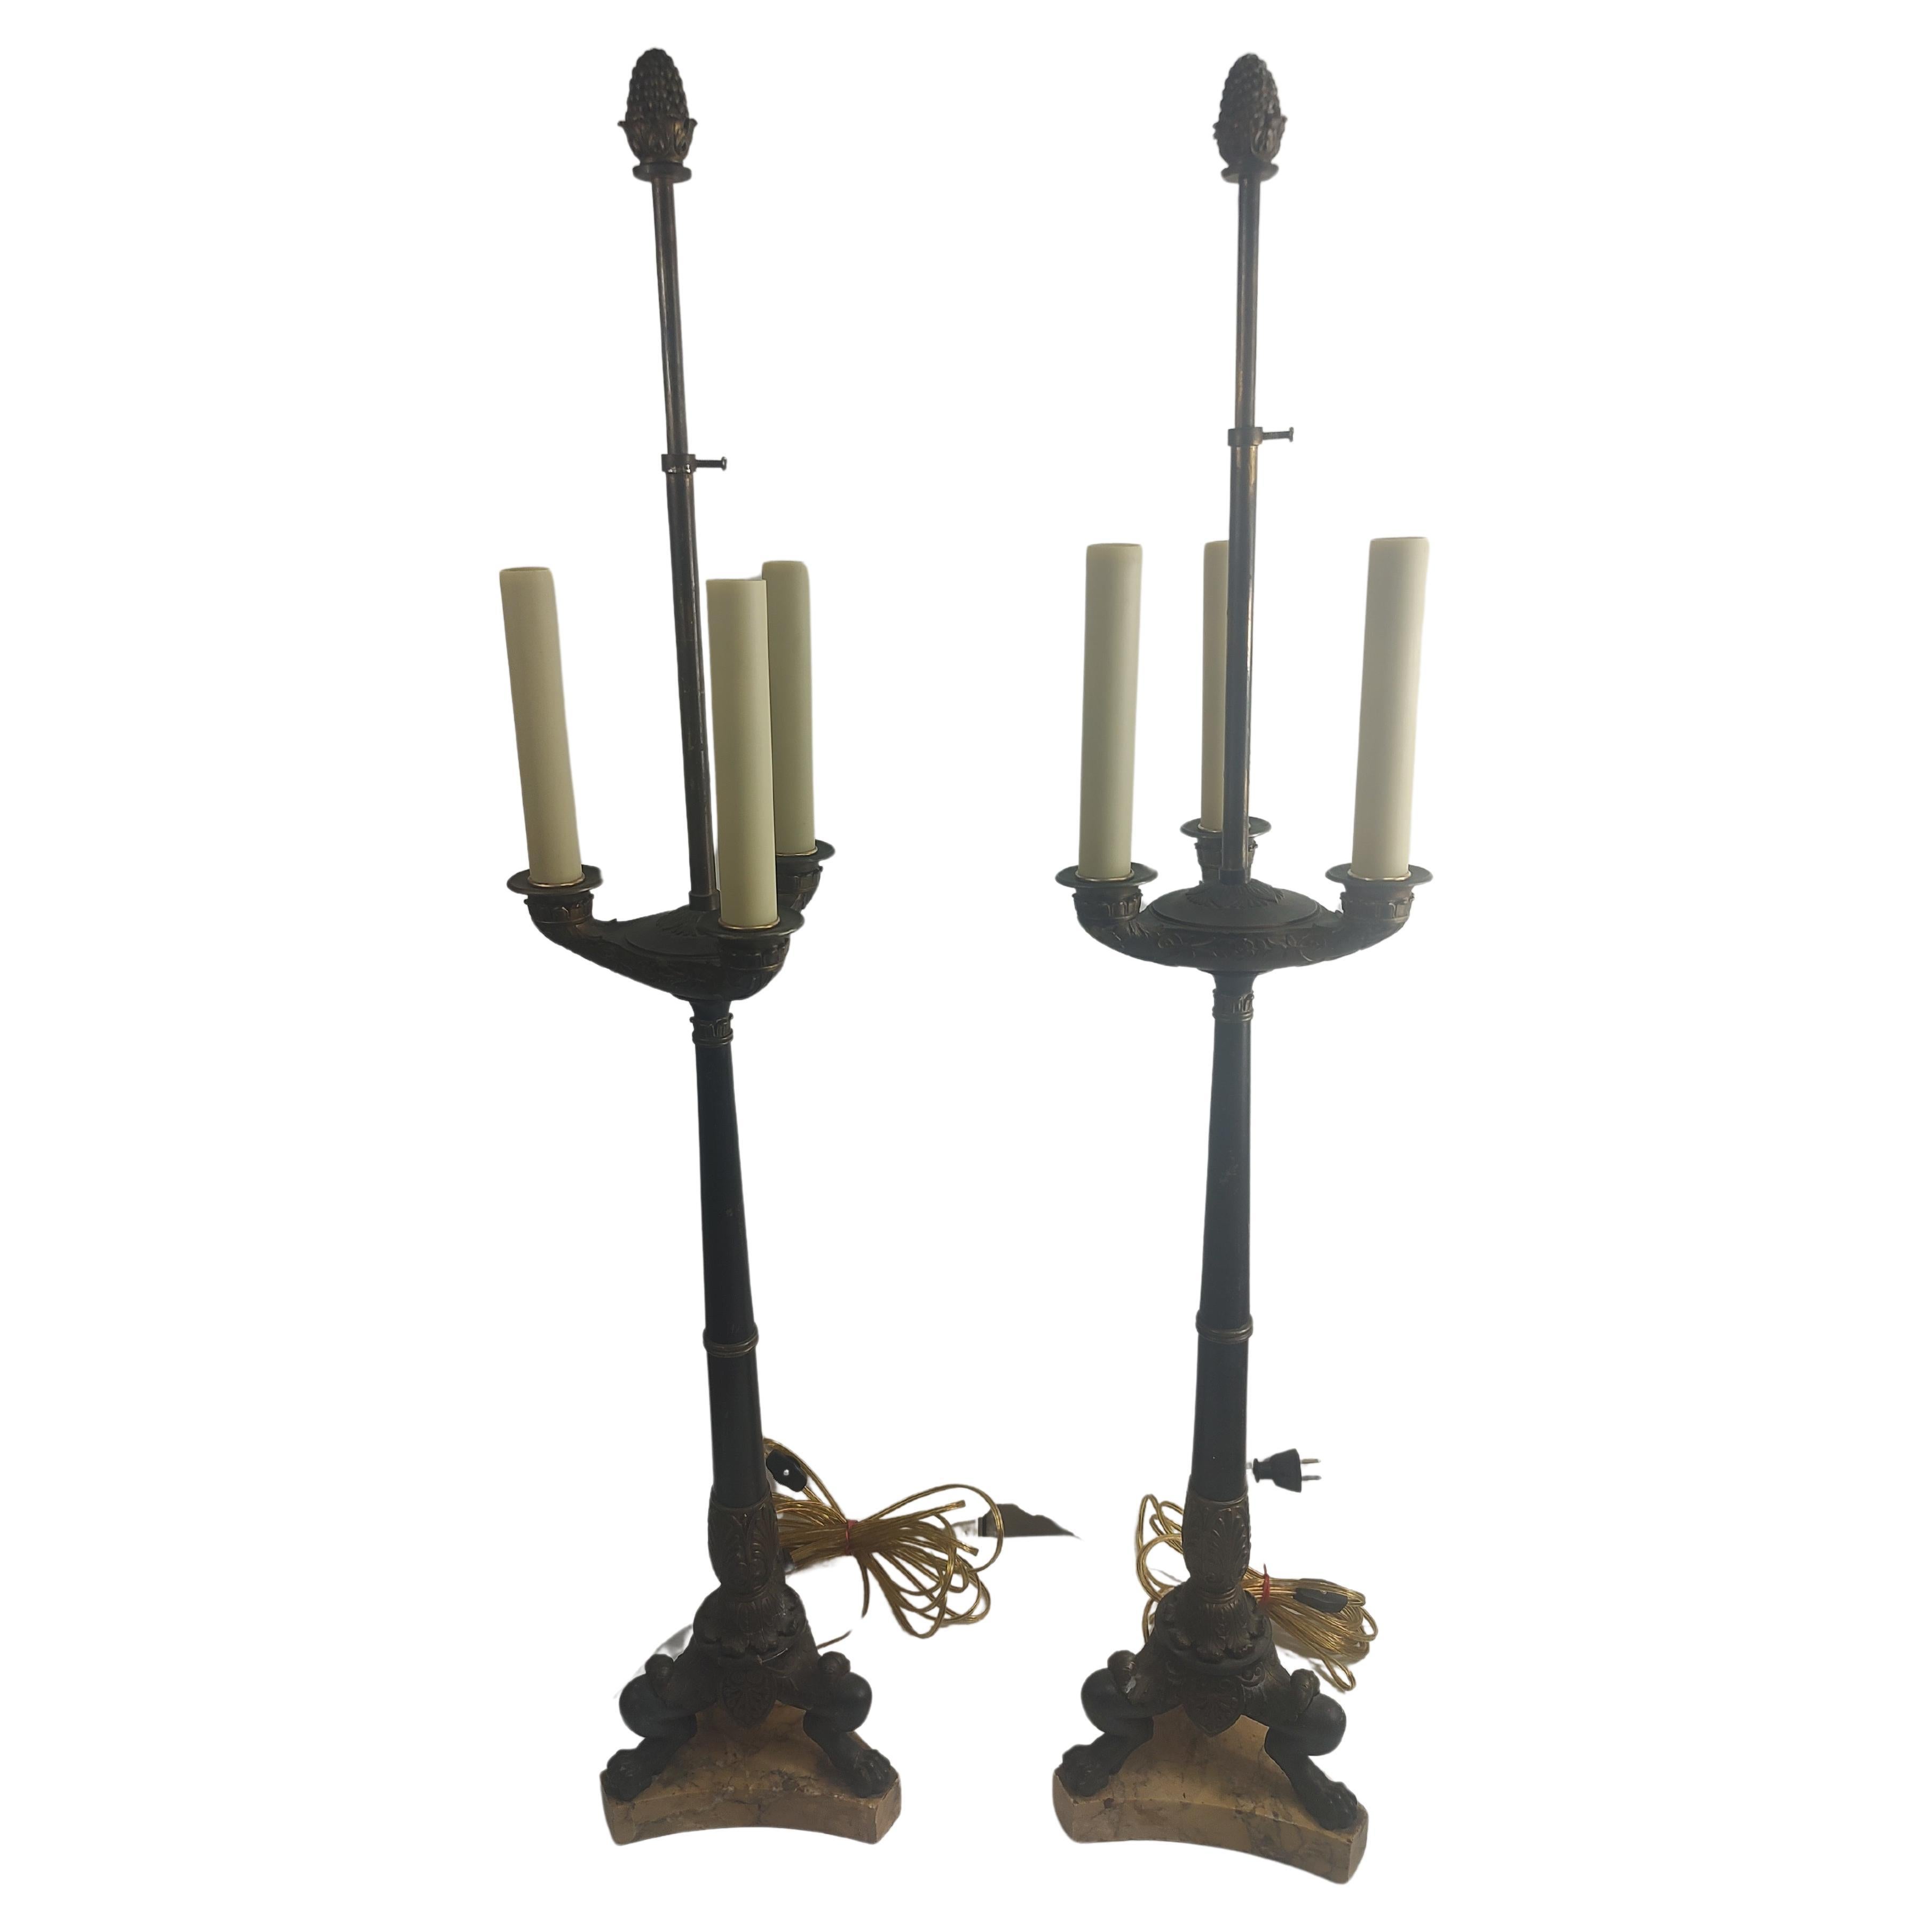 Pair of Tall Bronze Egyptian Revival Candelabra Style Table Lamps C1900 For Sale